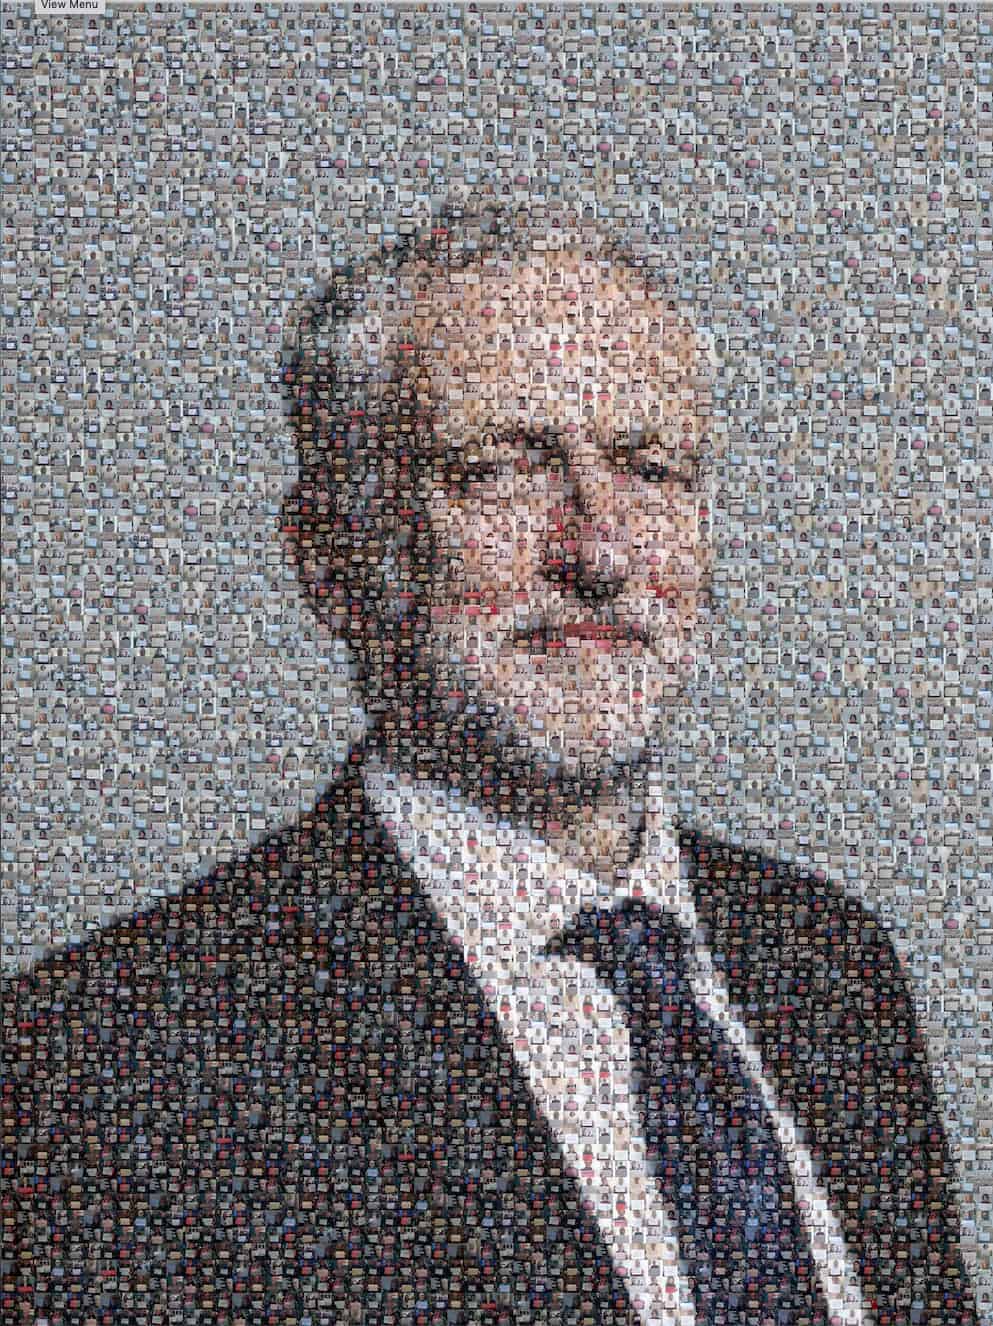 Lots and lots of Jews4Labour make a giant Jeremy Corbyn mosaic